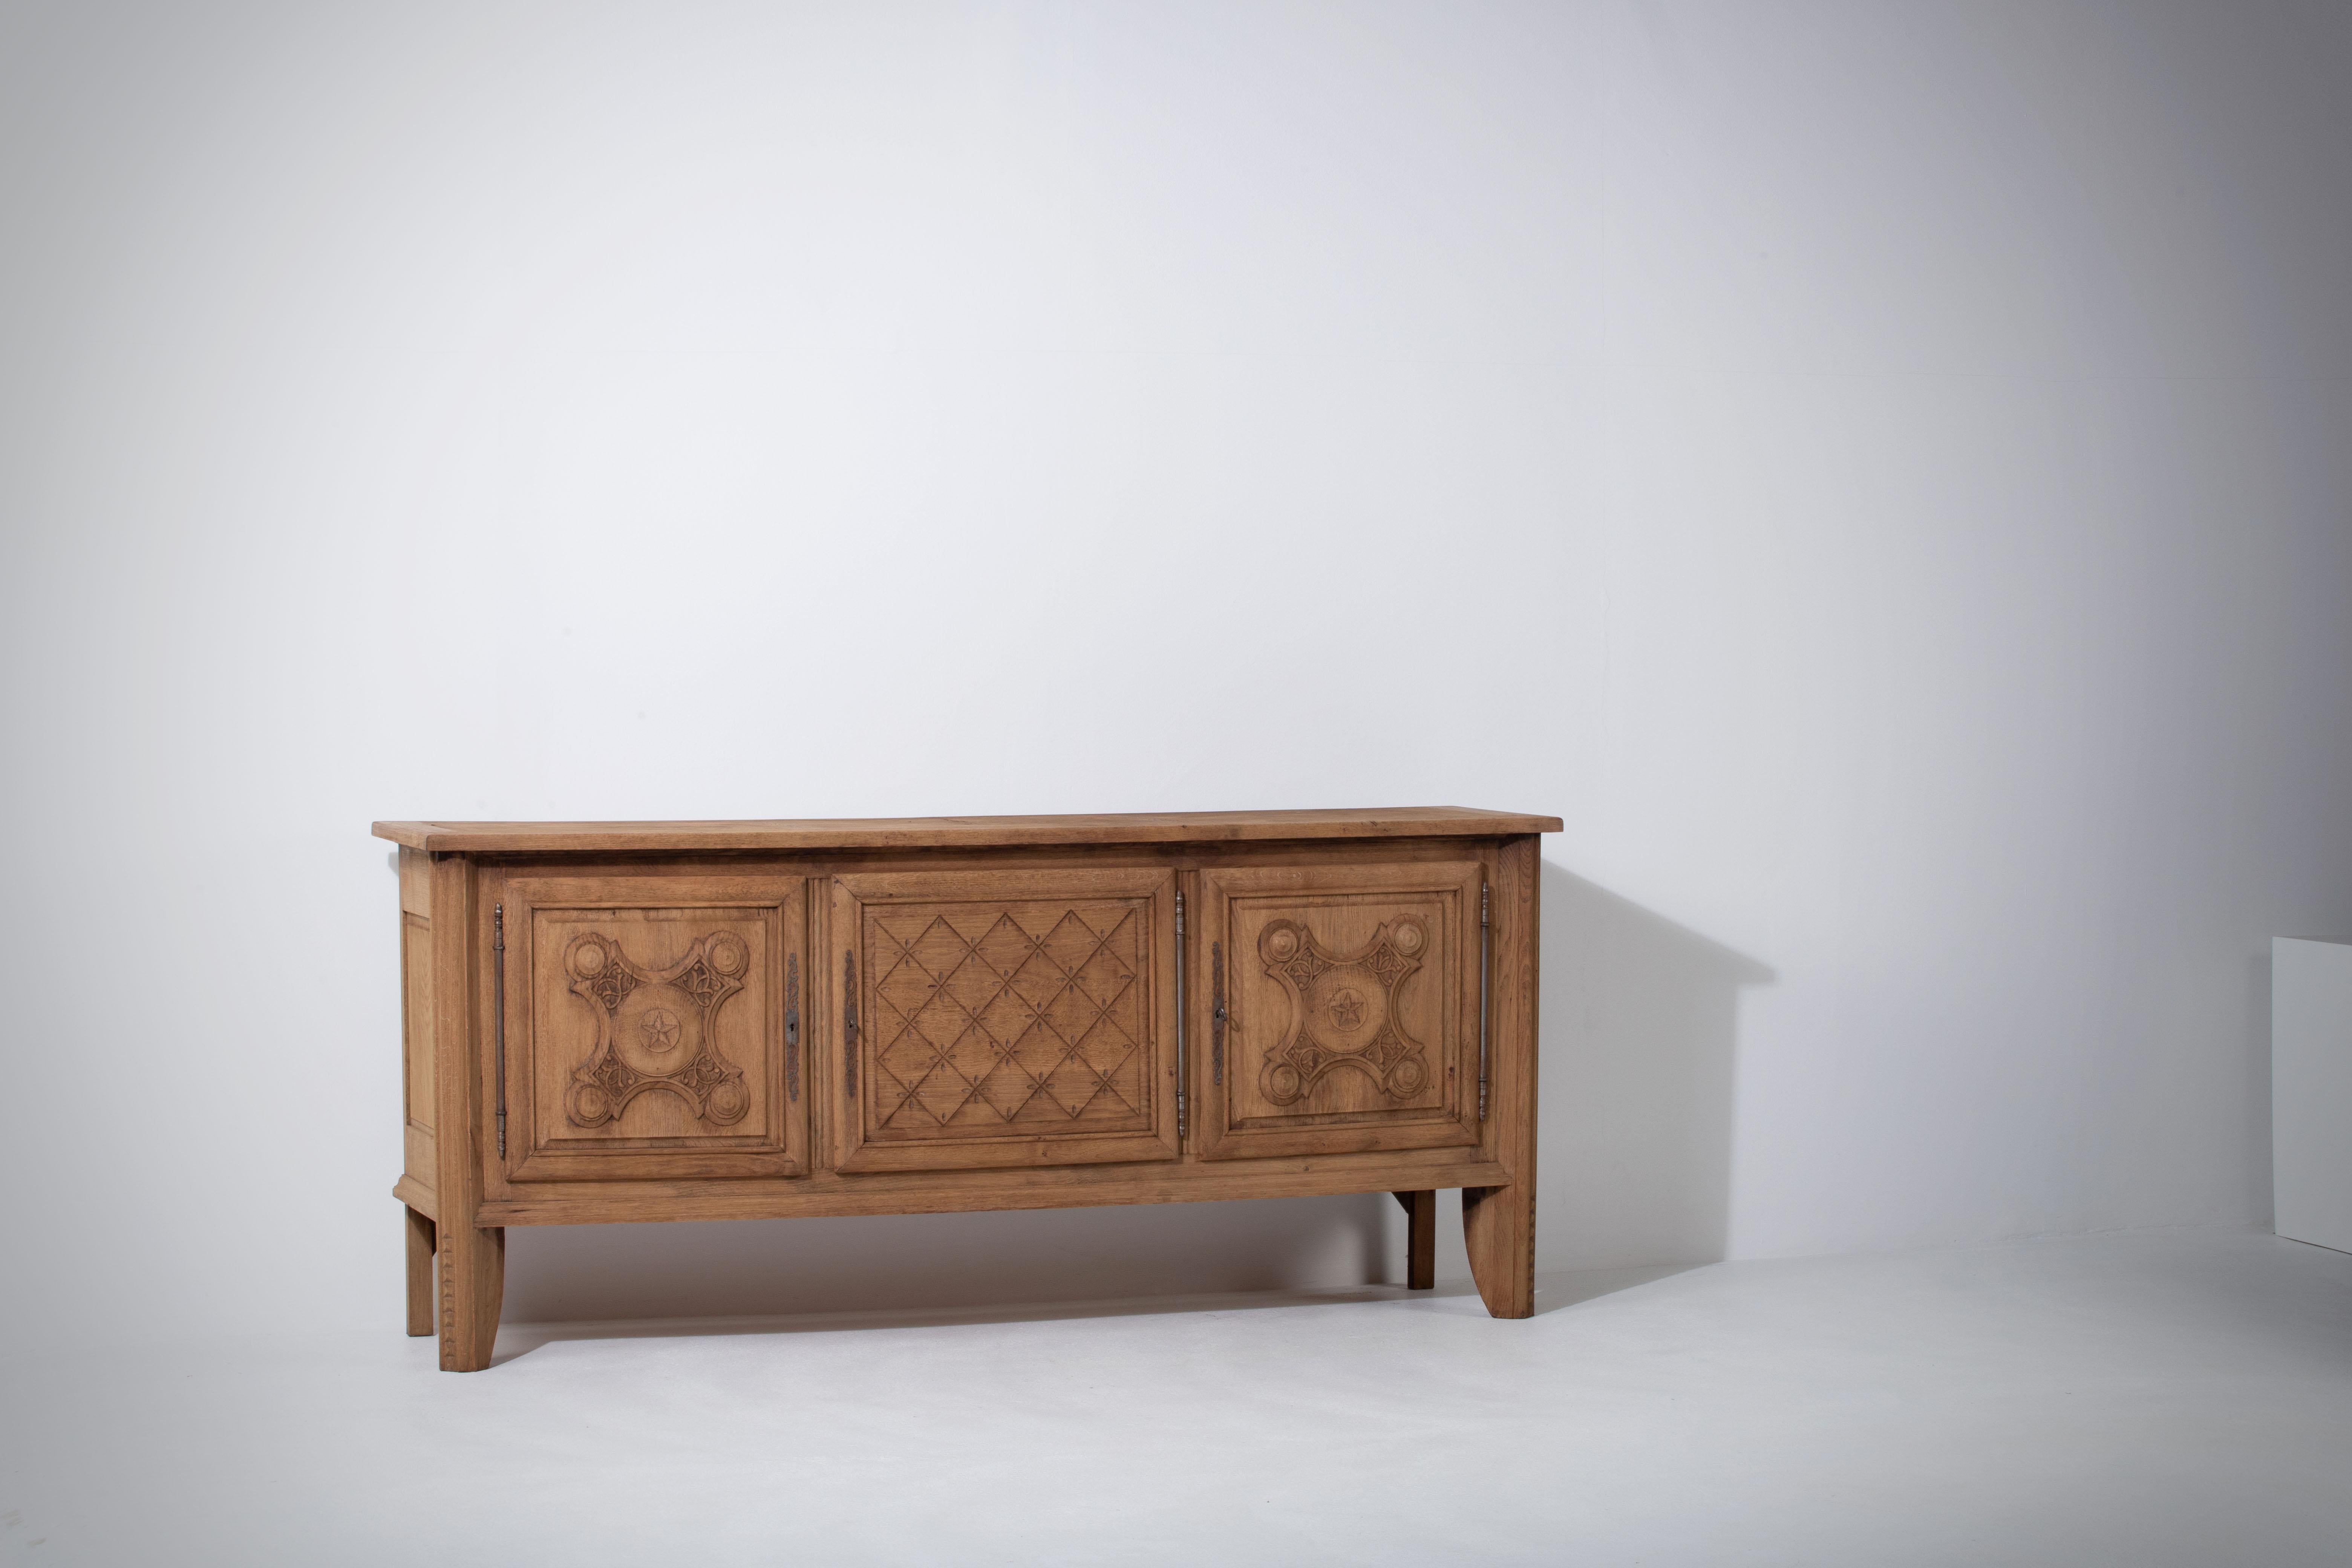 A matching sideboard is available.
Brutalist solid Elm sideboard, credenza.
The buffet features stunning oak structure on door panels. It offers ample storage, with shelve behind the doors. 
A unique blend of Art Deco Spanish and Brutalist Modern